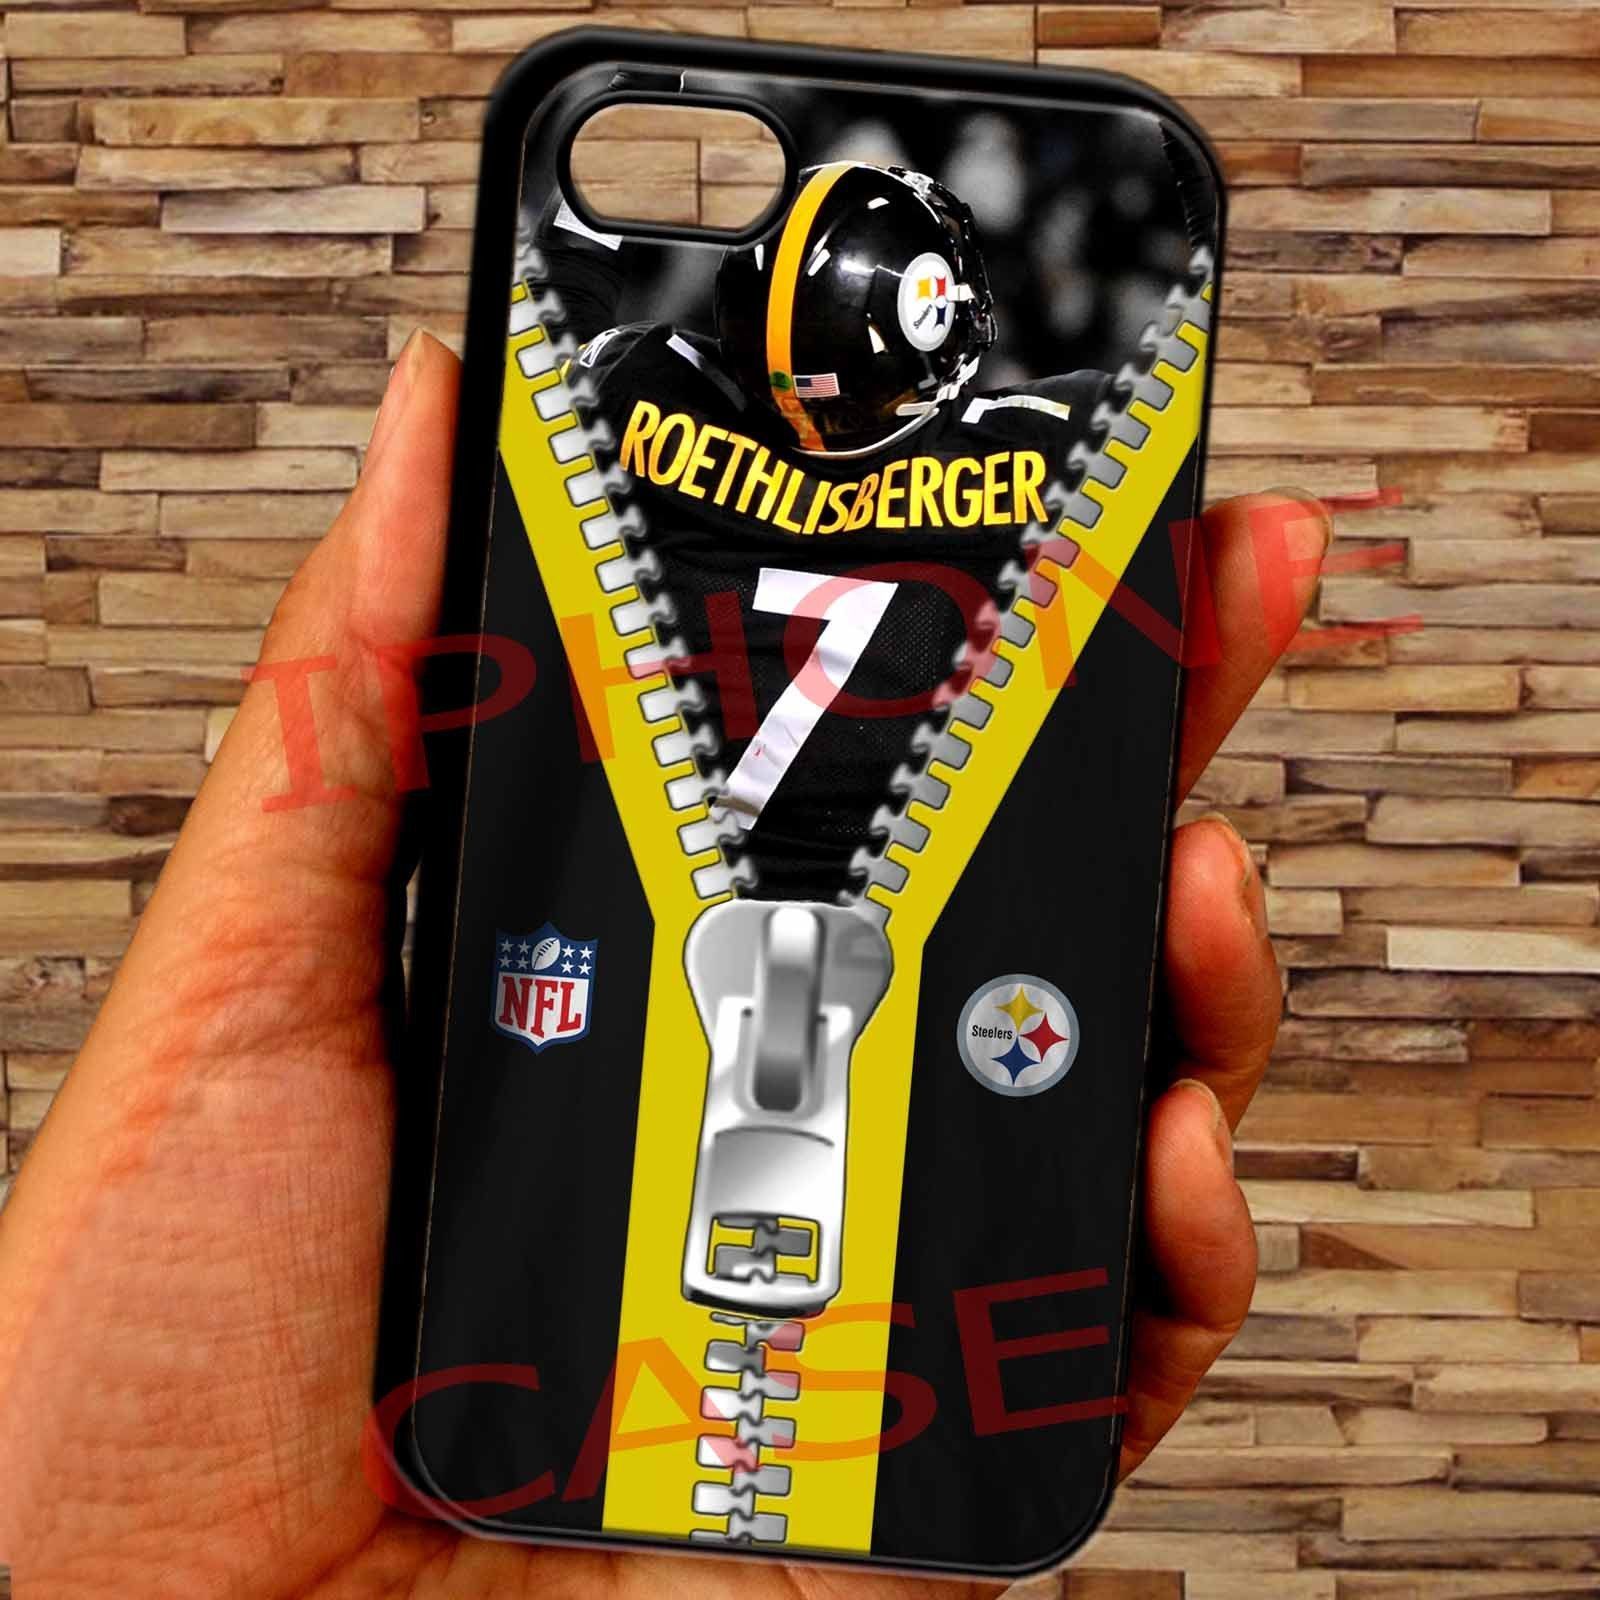  cool pittsburgh steelers roethlisberger Case for iPhone iPod